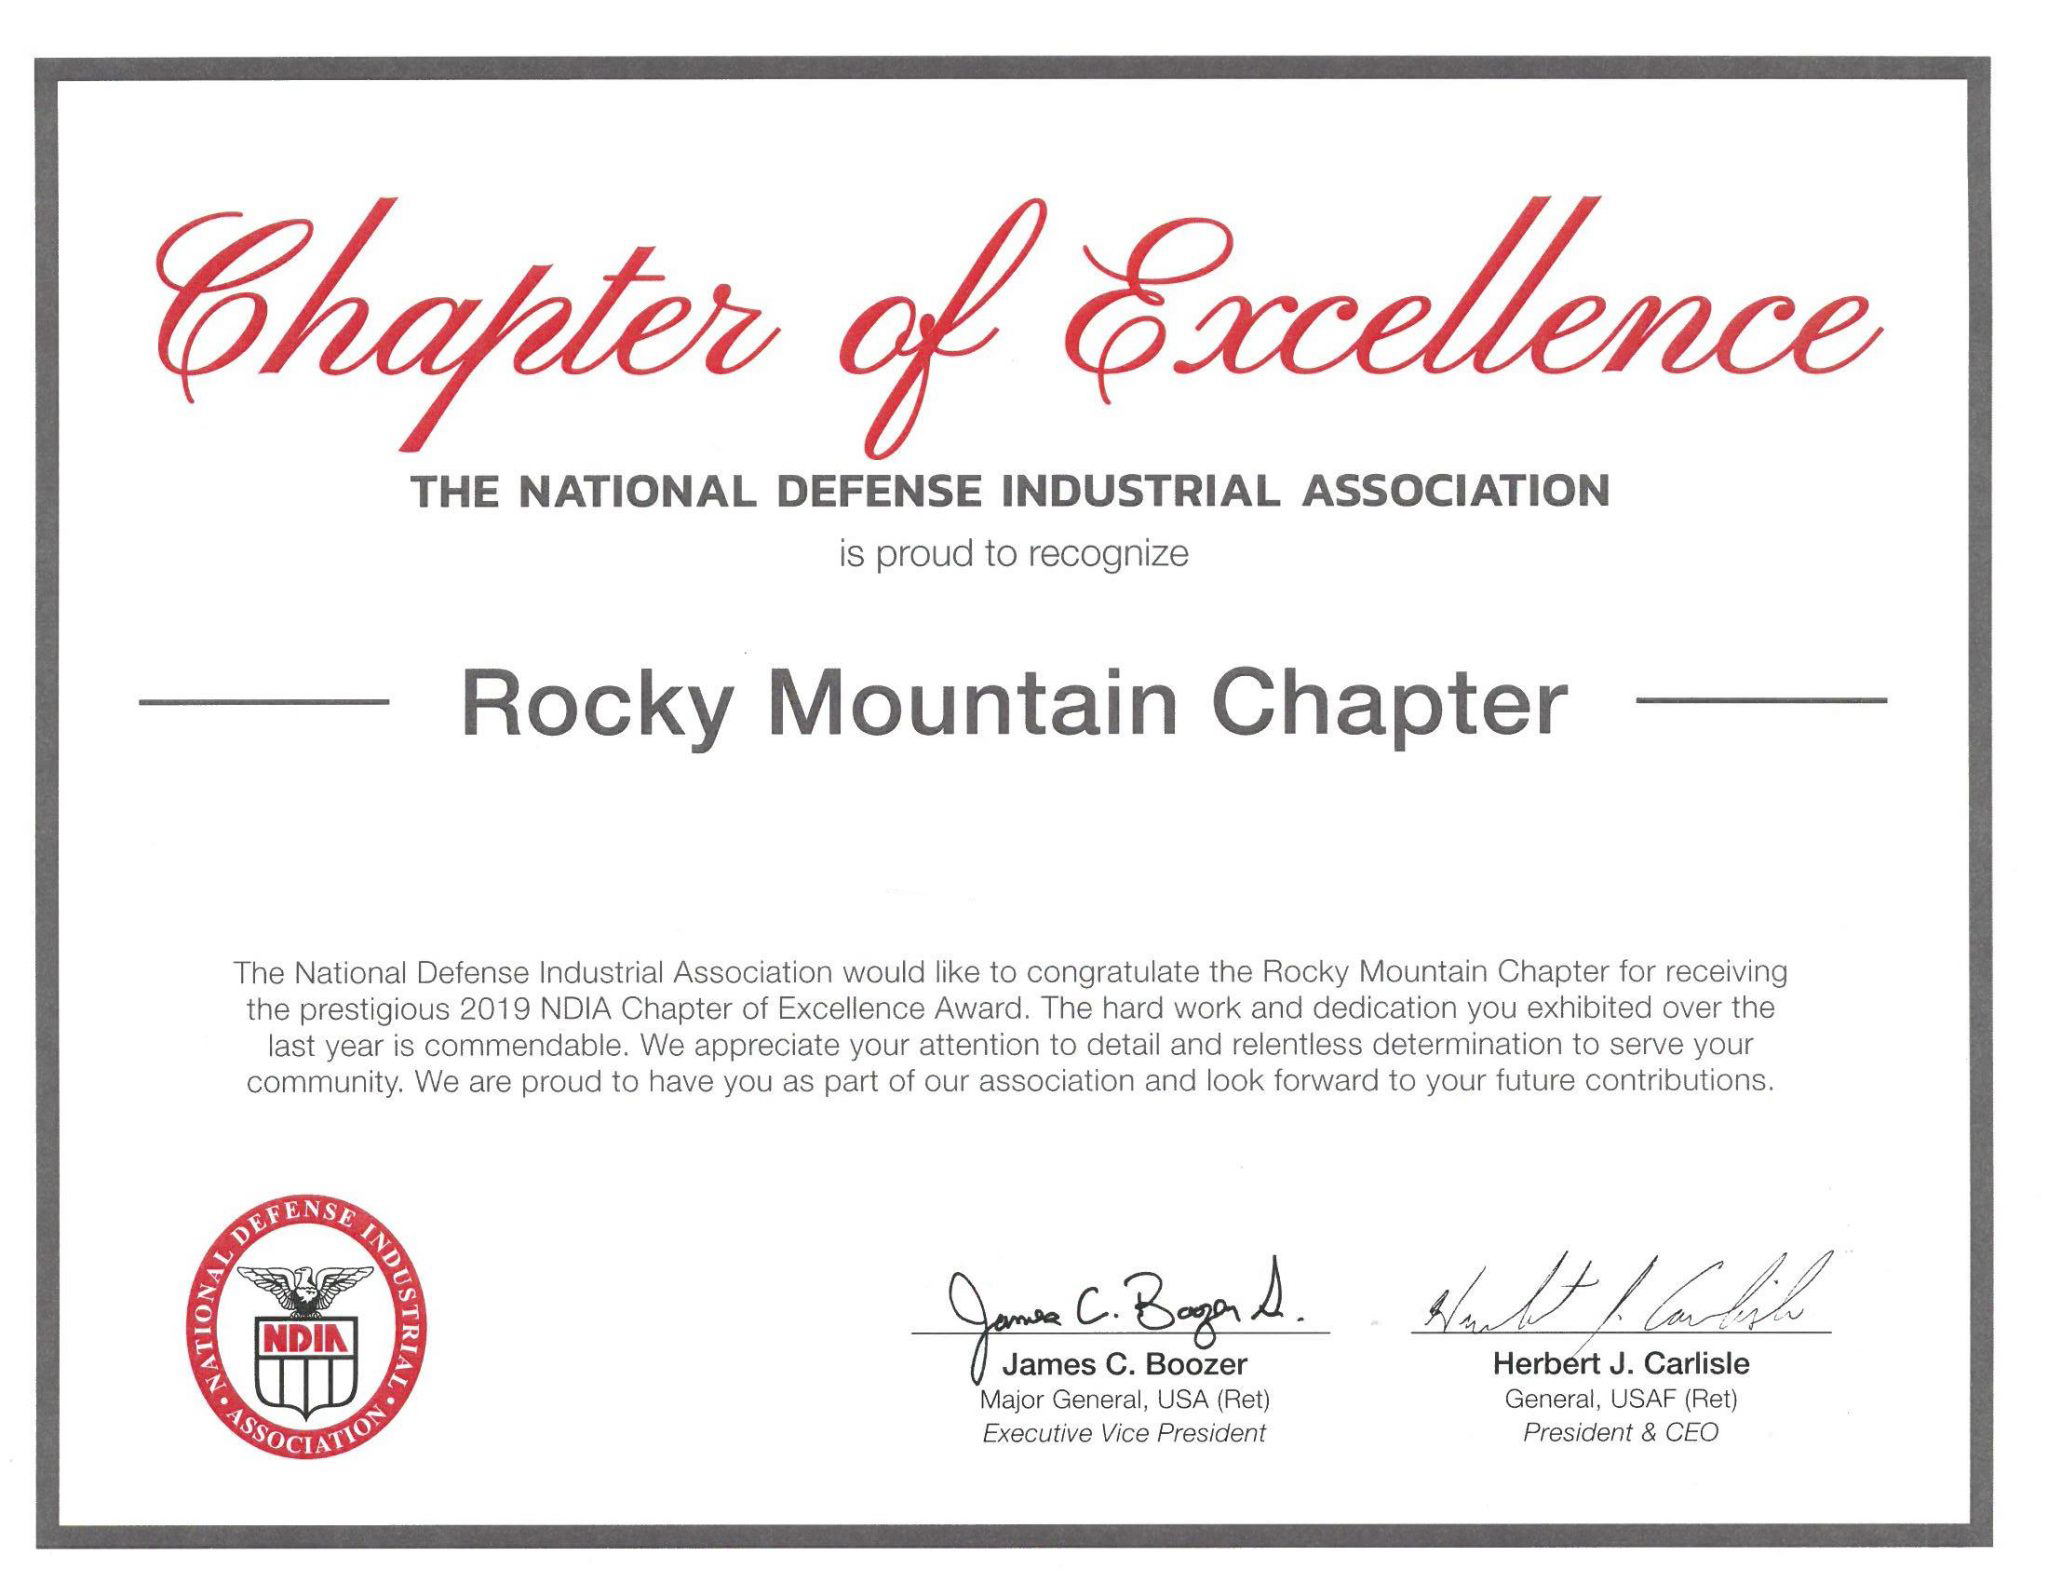 Chapter-of-Excellence-Certification-Rocky-Mountain-Chapter